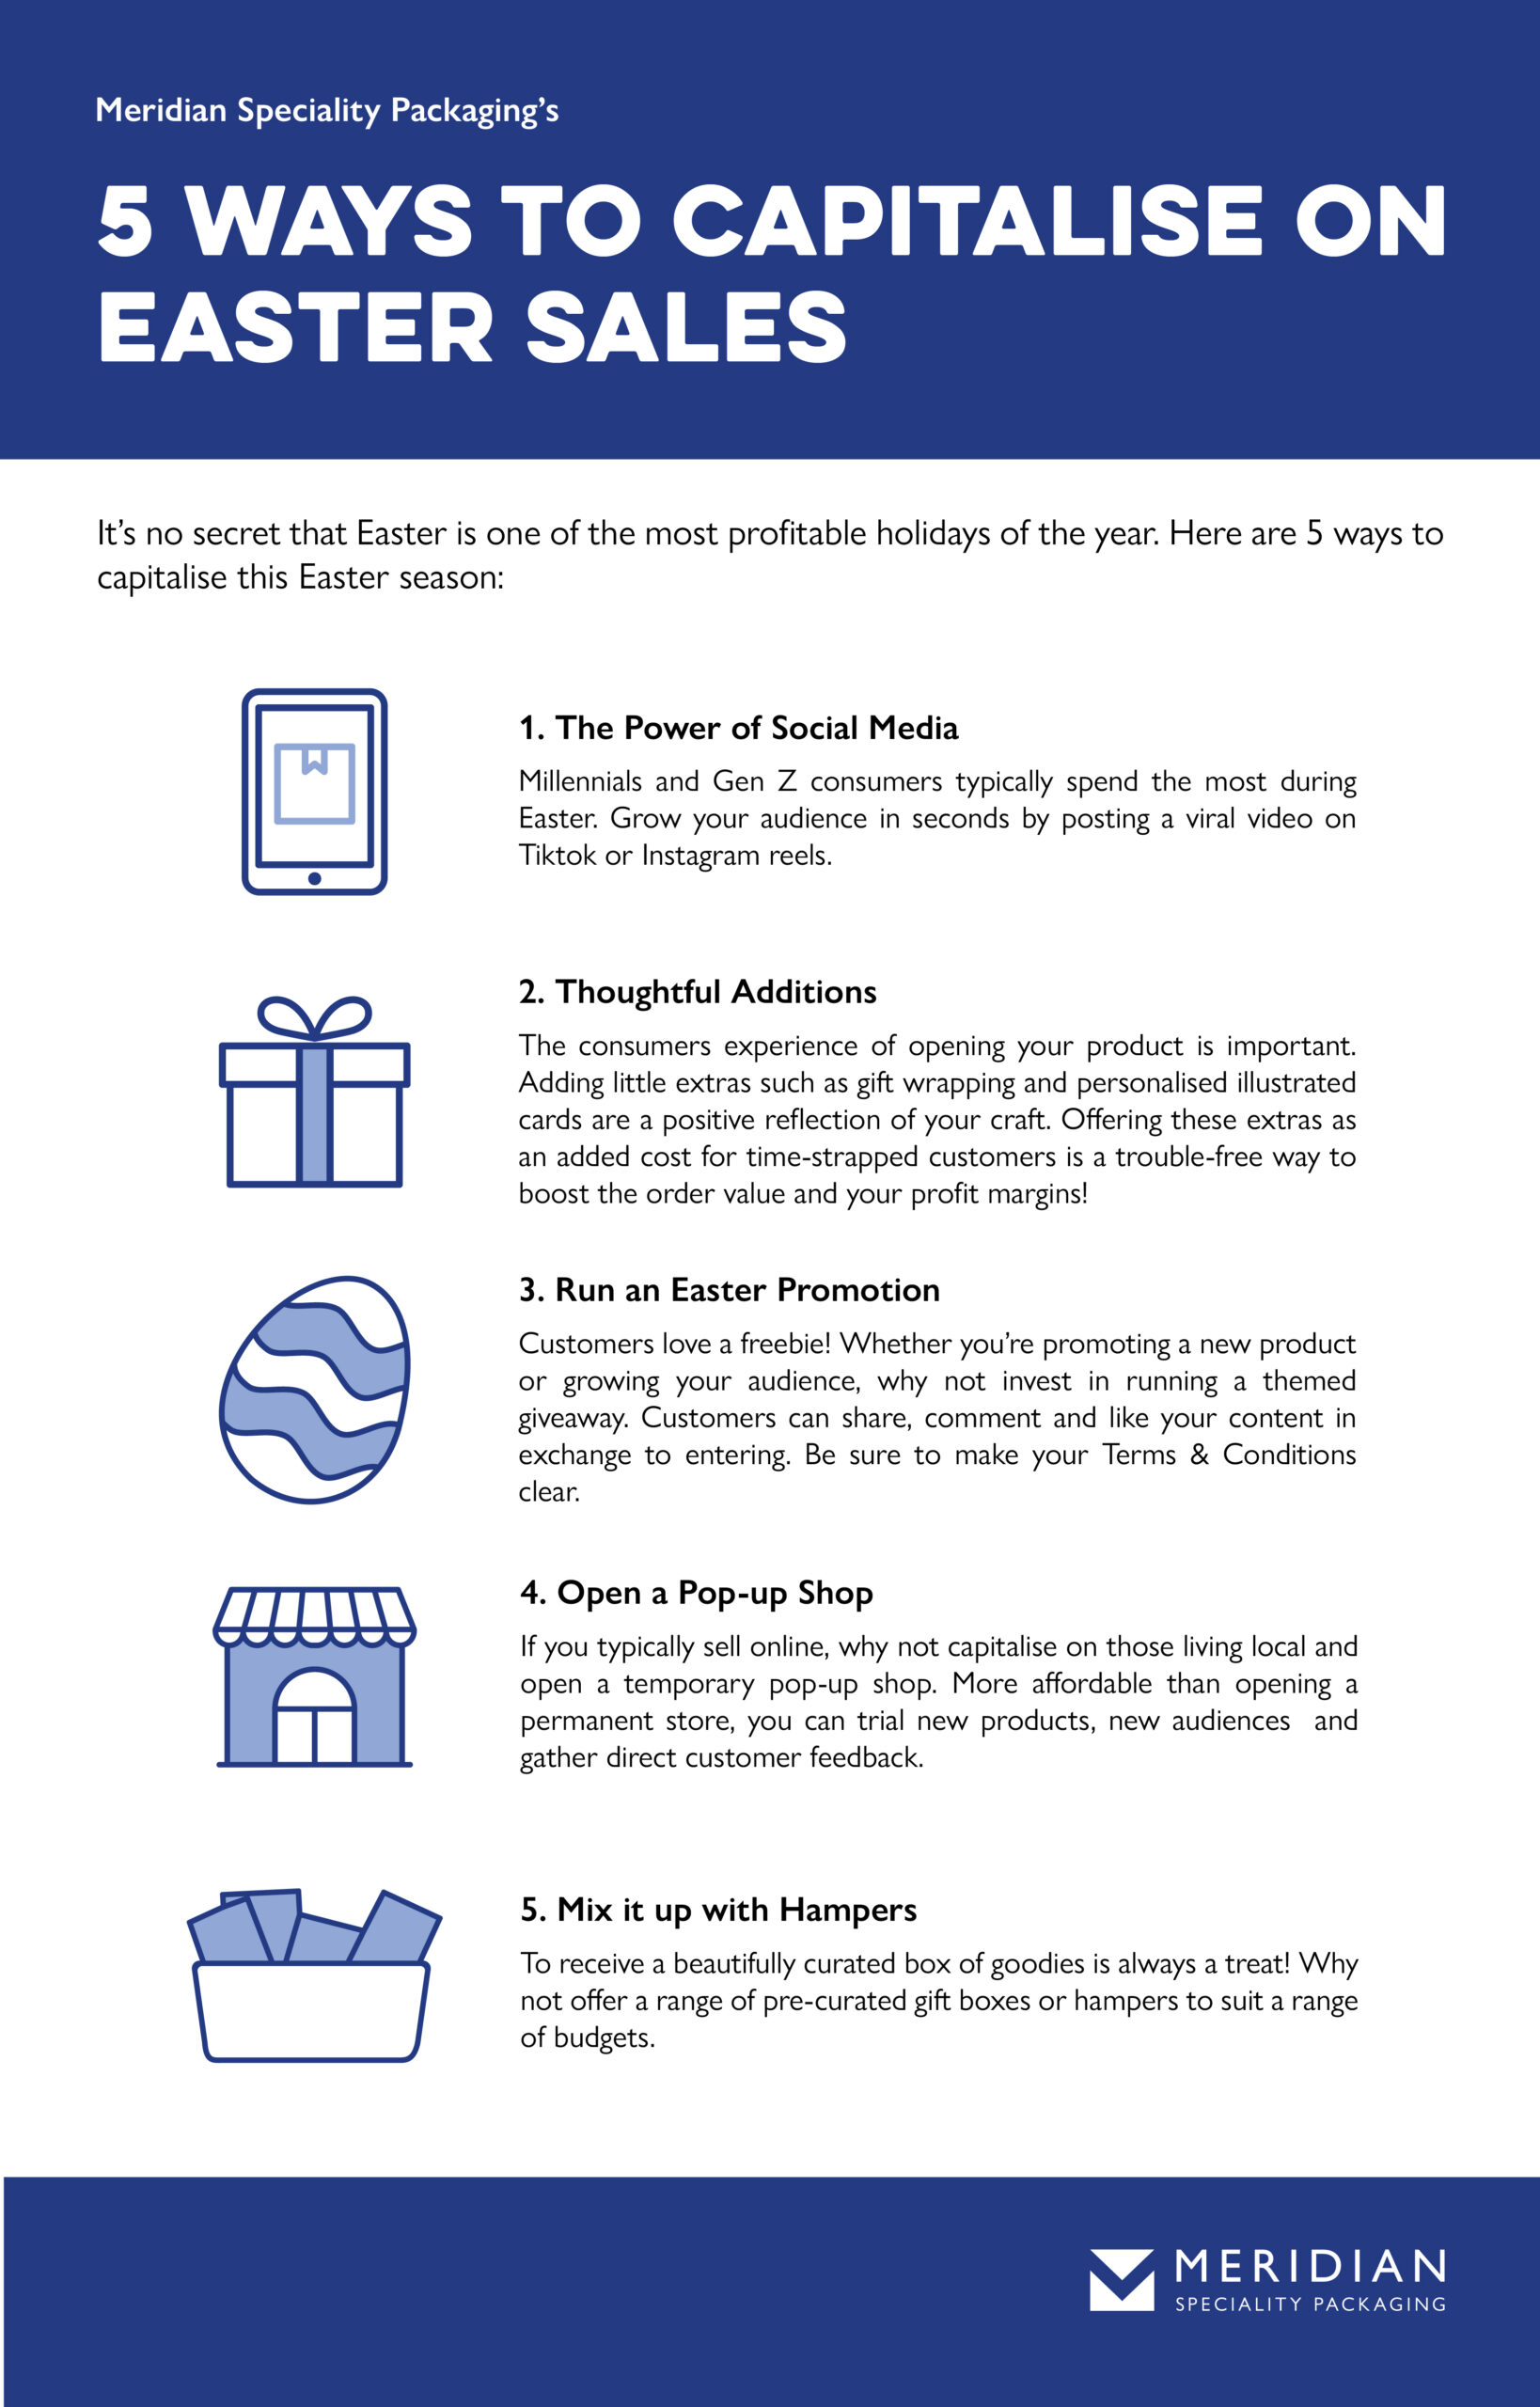 An infographic showing 5 ways to capitalise on Easter sales including promoting the use of social media, offering extras, promotions and opening a pop-up shop